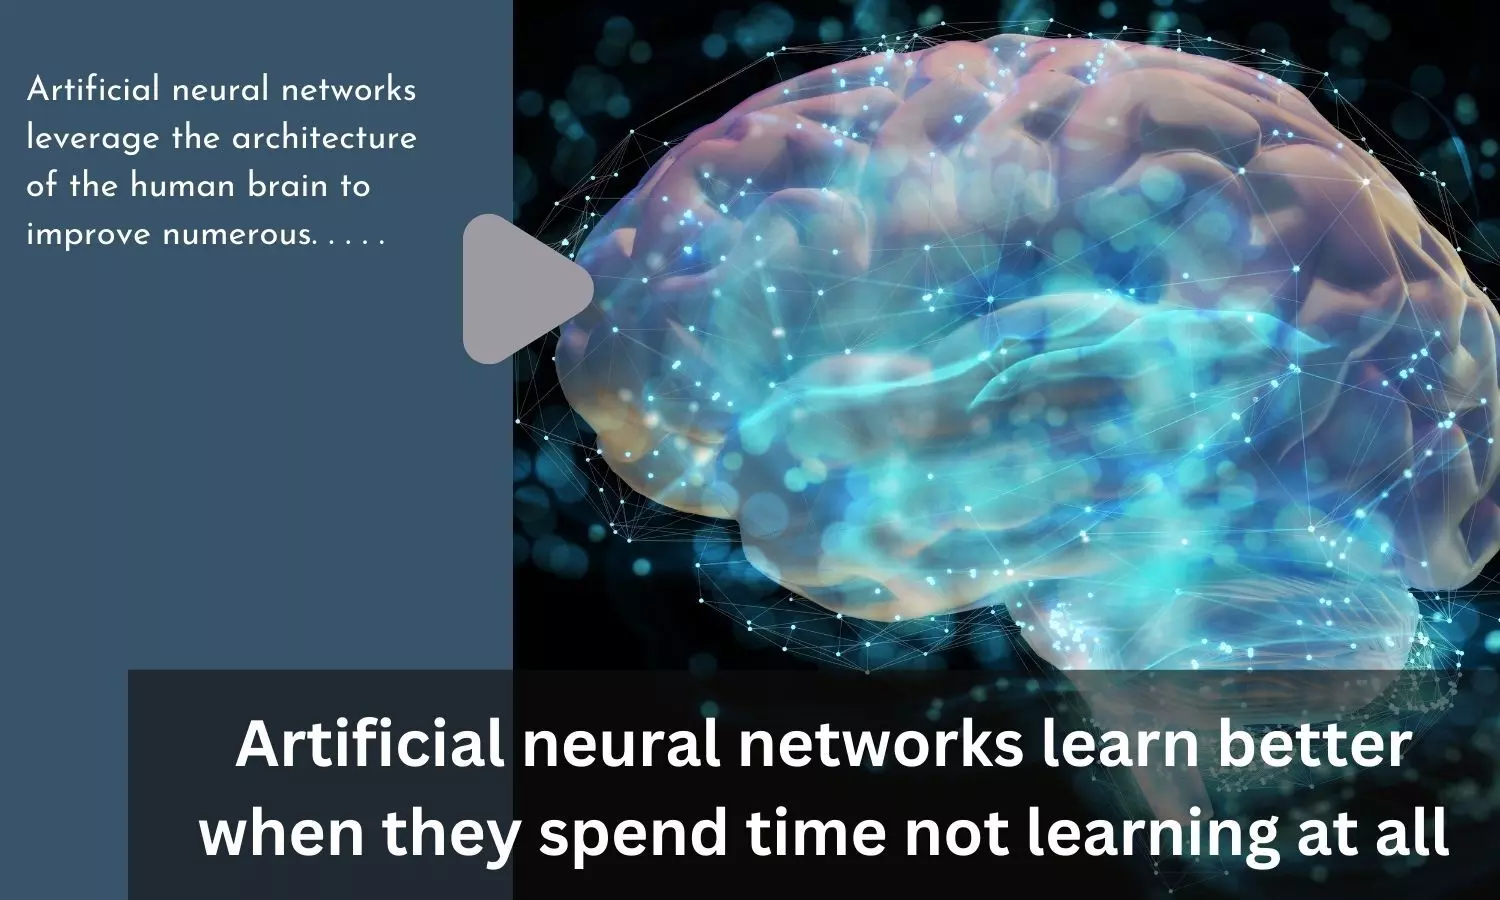 Artificial neural networks learn better when they spend time not learning at all